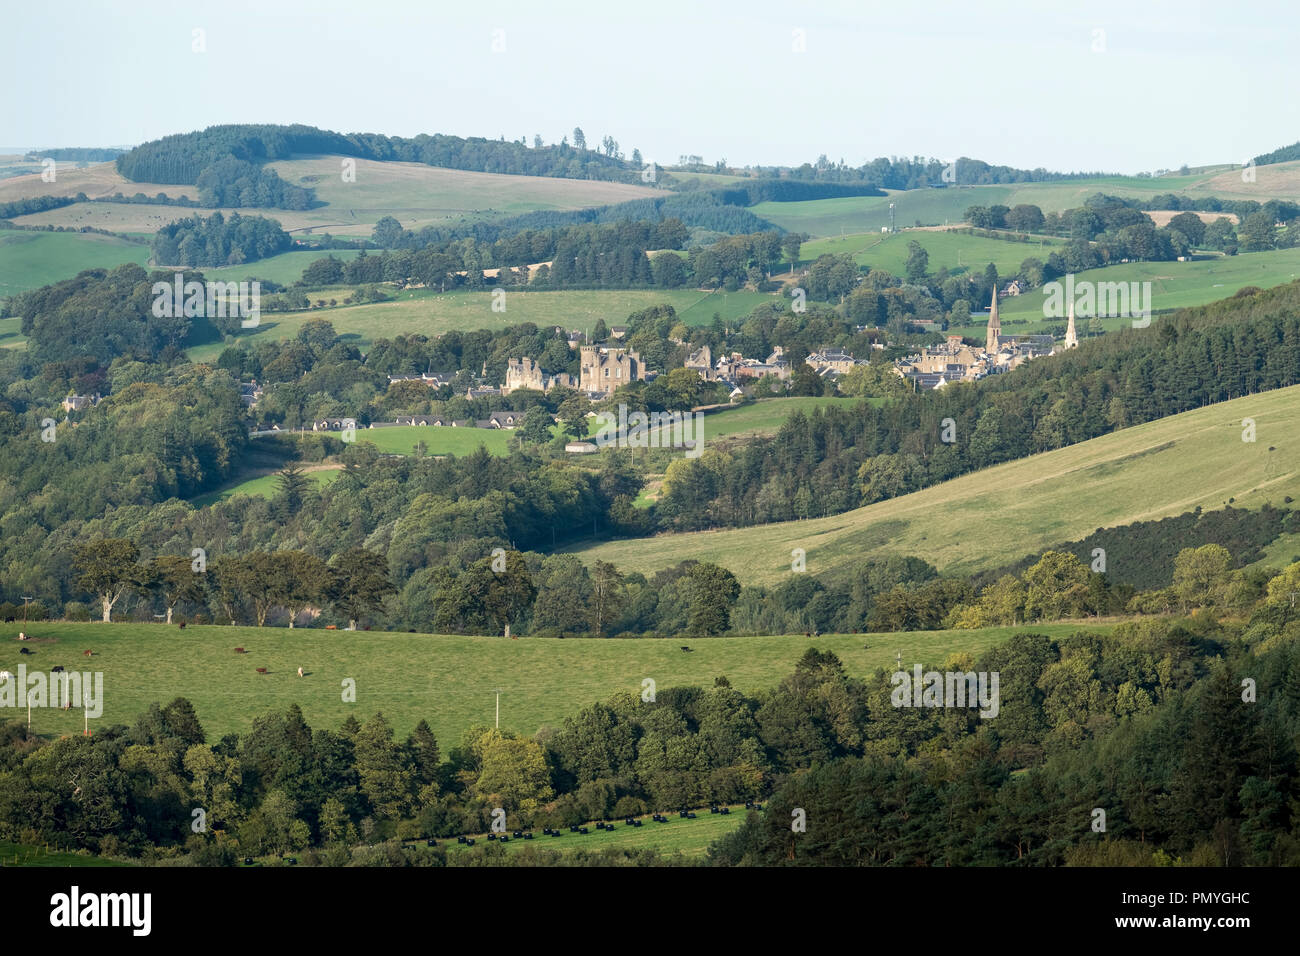 The town Selkirk in the Scottish Borders, Scotland. Stock Photo